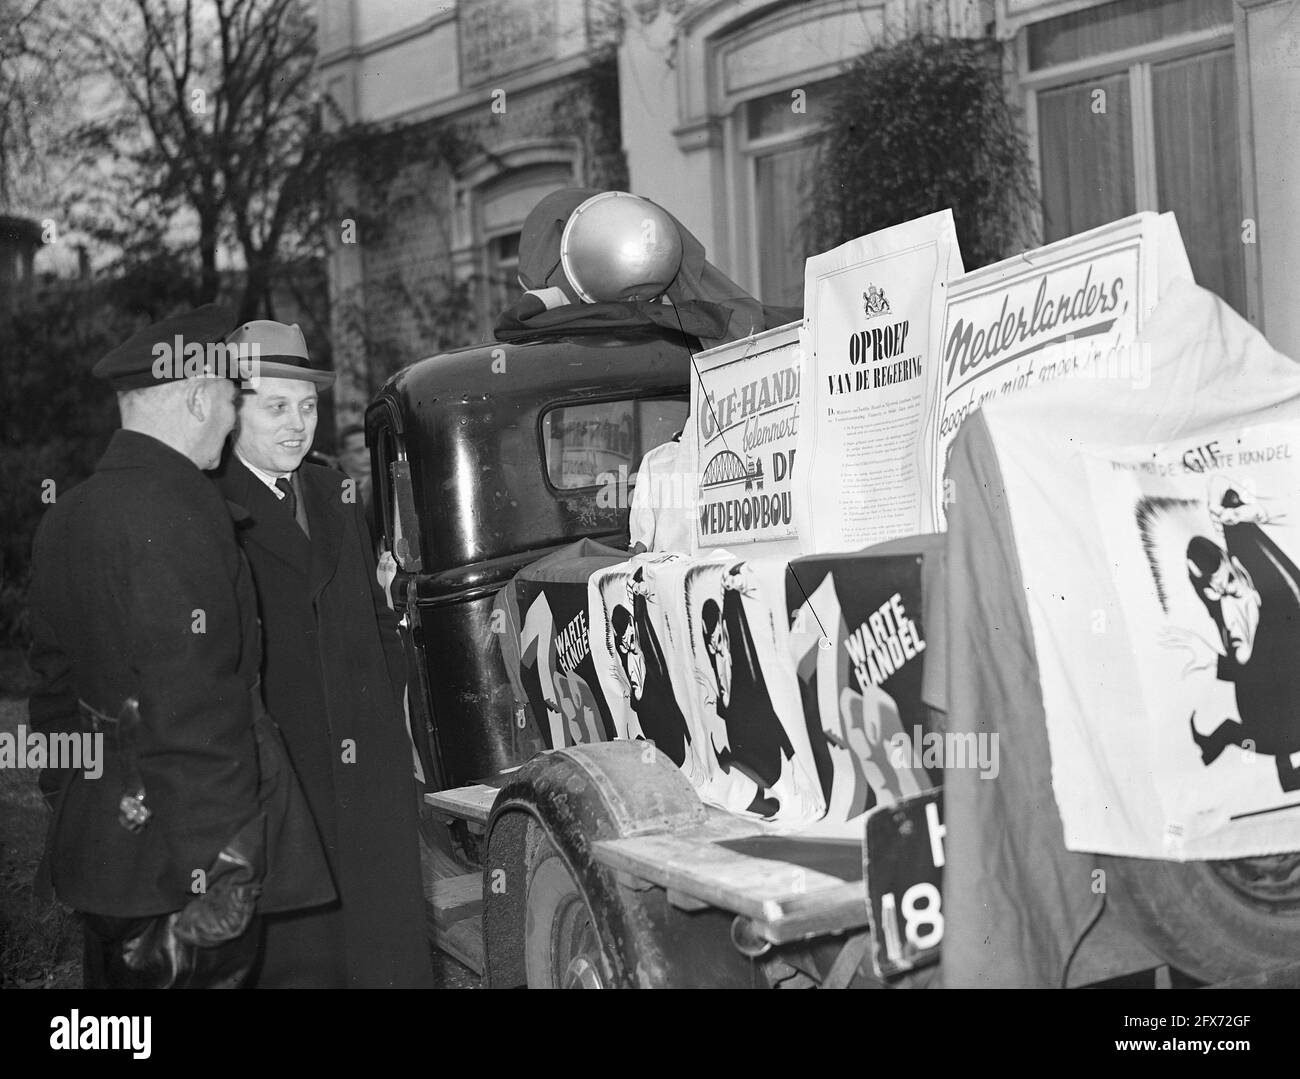 Action against black trade. Truck with posters, November 22, 1945, Actions, posters, crime, trade, advertising, vehicles, The Netherlands, 20th century press agency photo, news to remember, documentary, historic photography 1945-1990, visual stories, human history of the Twentieth Century, capturing moments in time Stock Photo